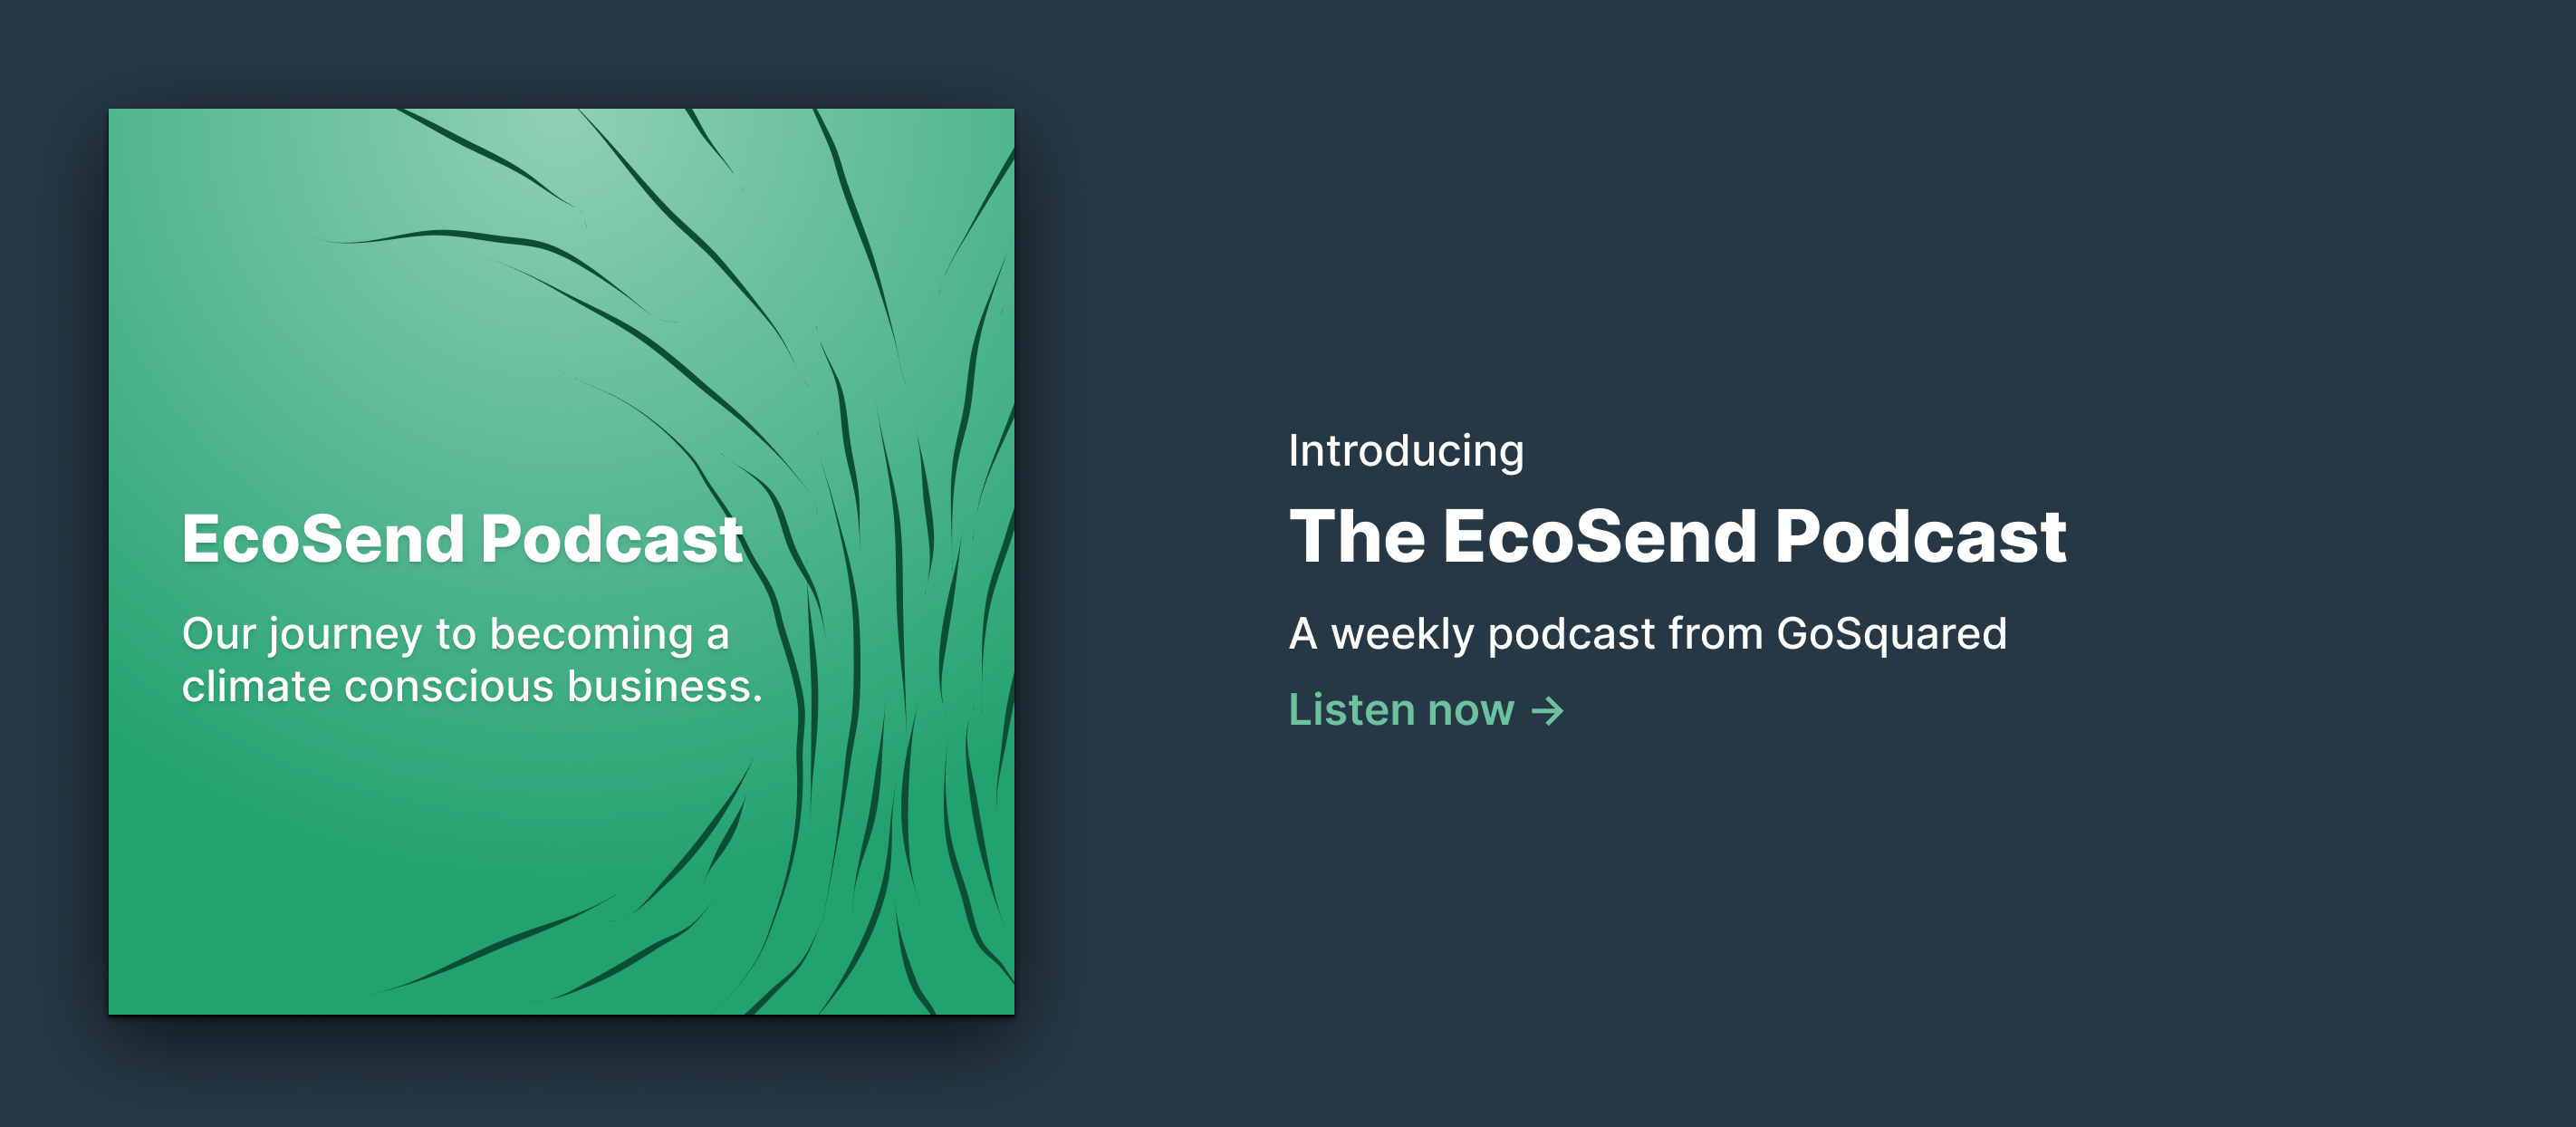 Introducing the EcoSend Podcast